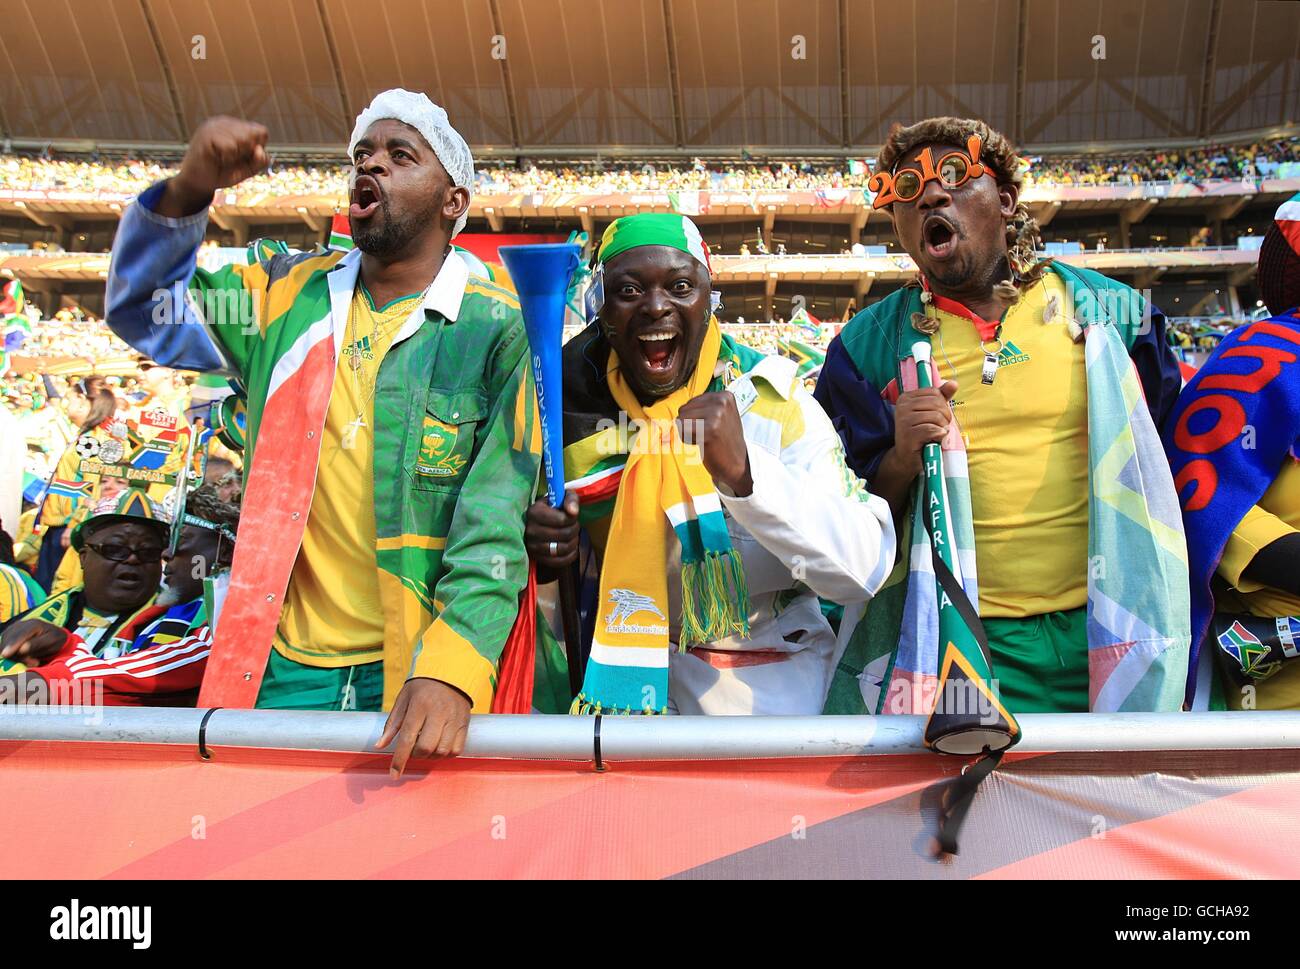 Soccer - 2010 FIFA World Cup South Africa - Group A - South Africa v Mexico - Soccer City Stadium. South Africa fans cheer on their side in the stands prior to kick off Stock Photo